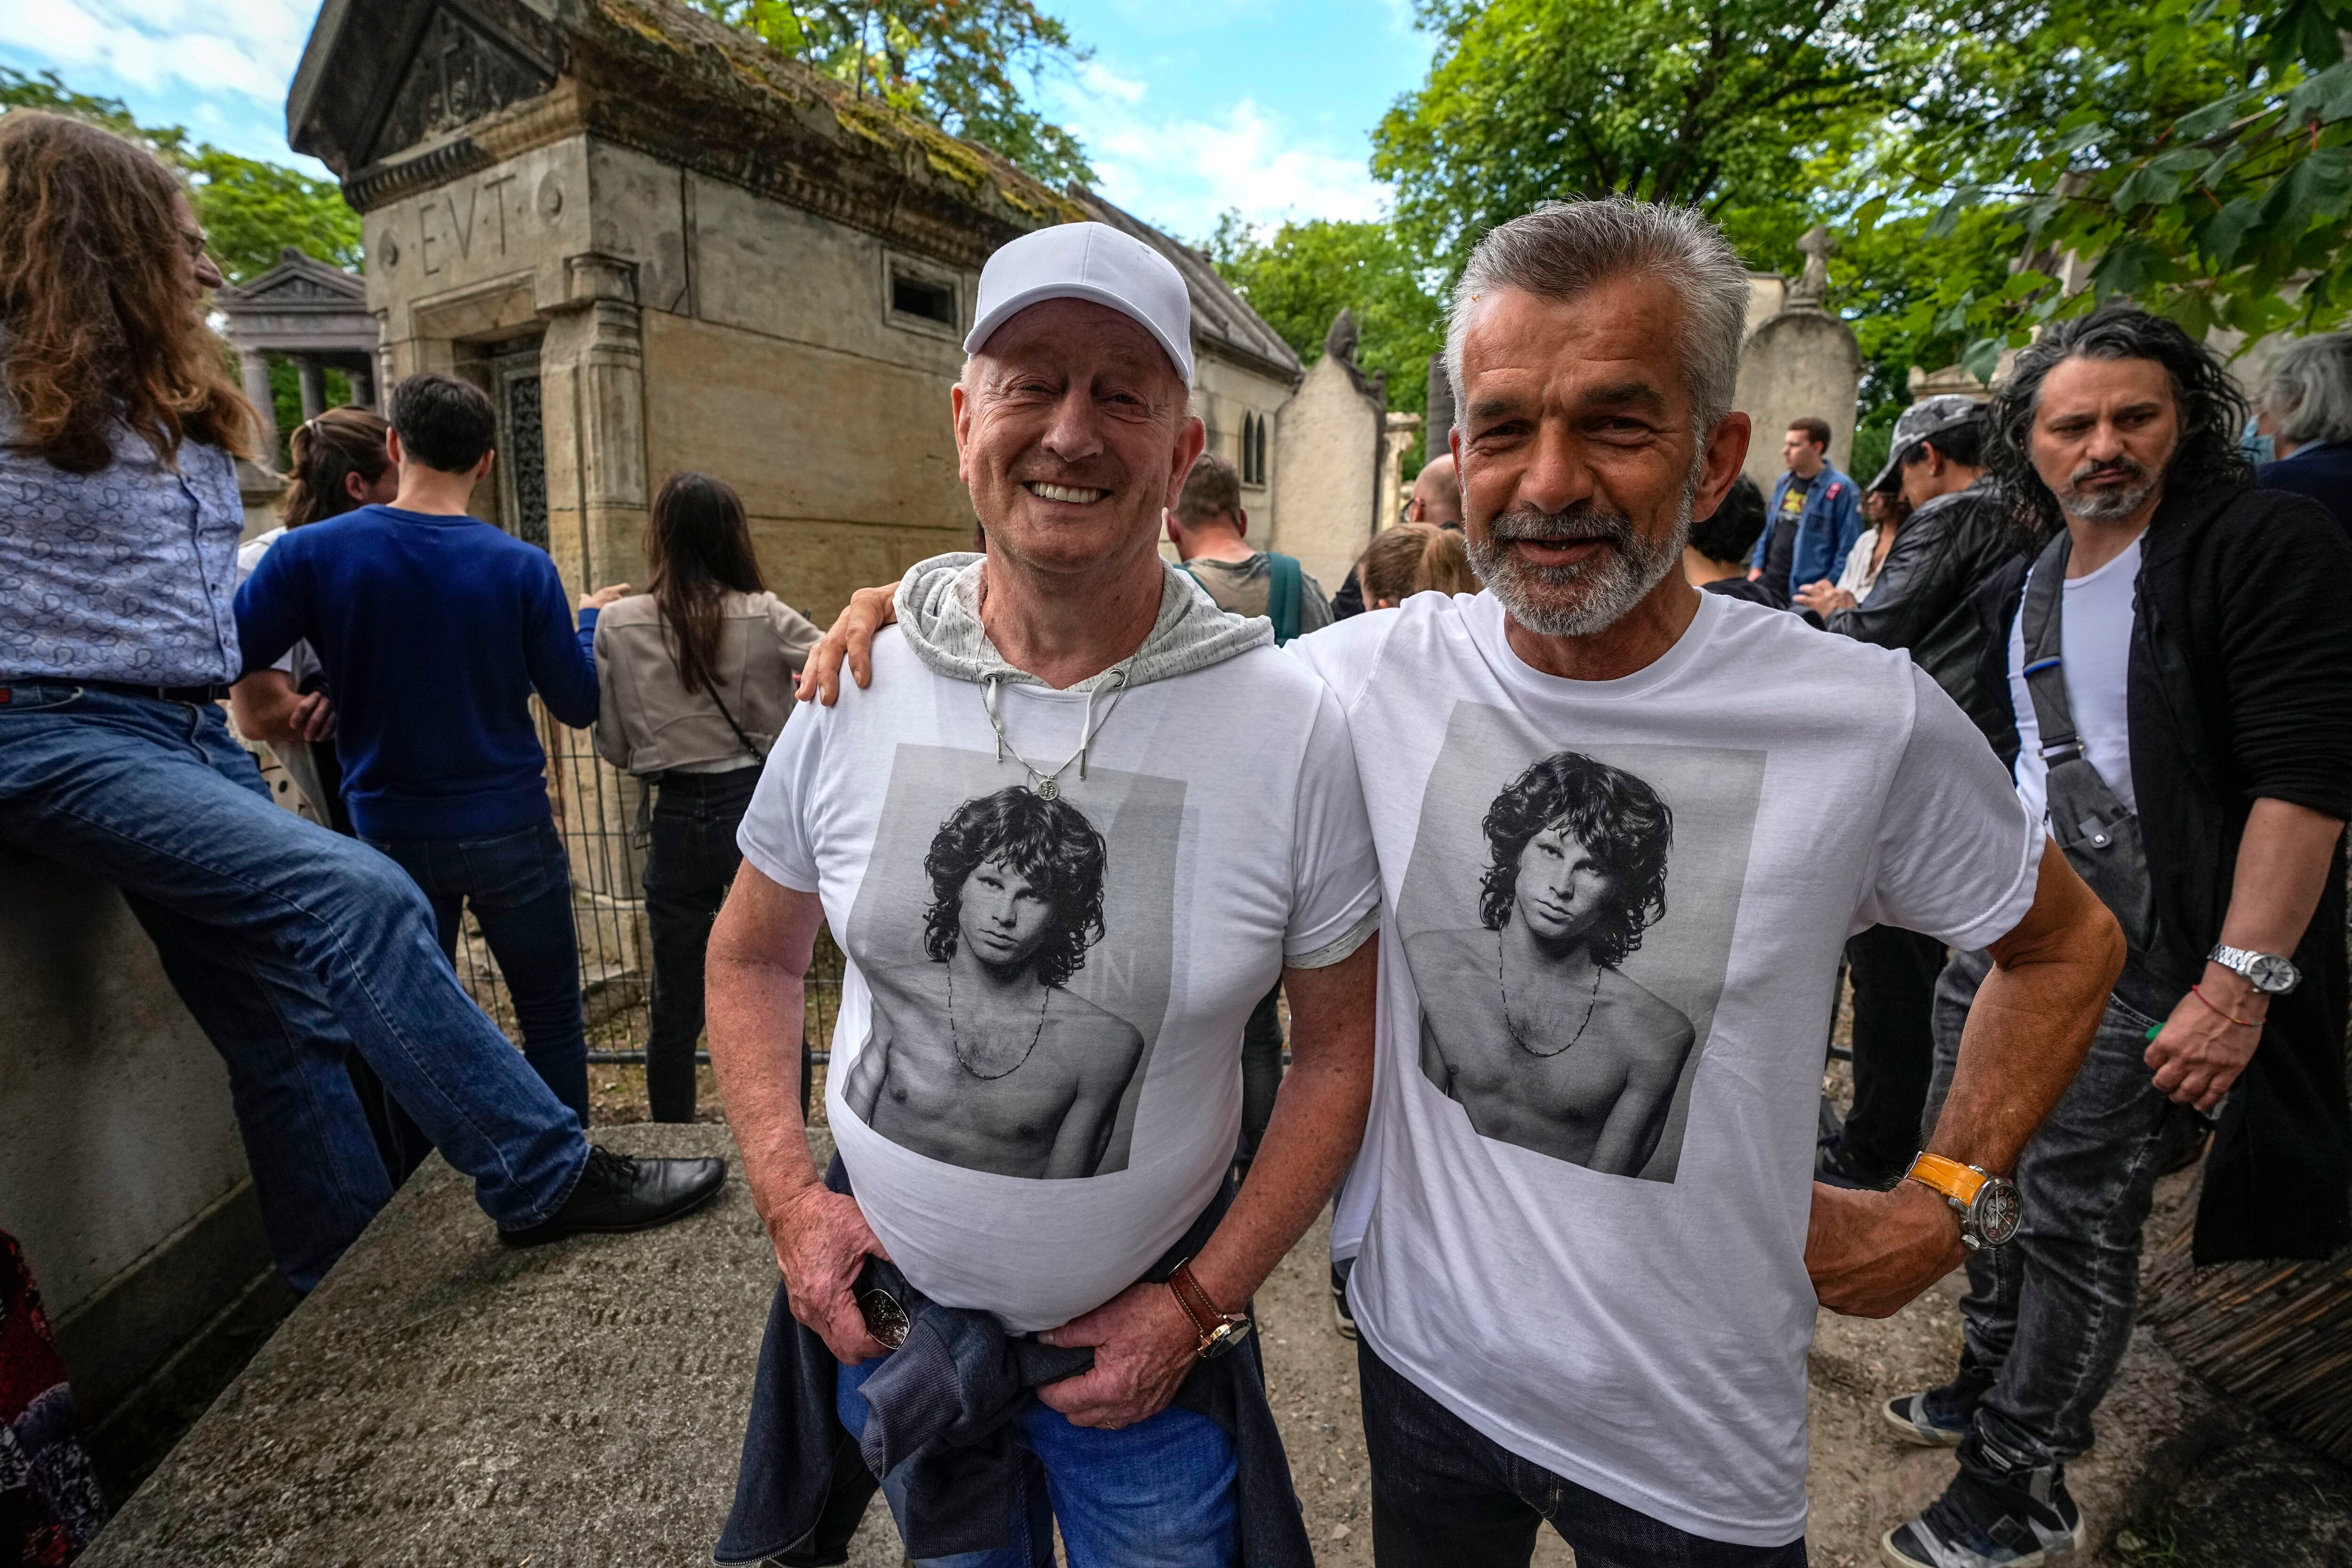 50 years after his death, fans honor Jim Morrison in Paris